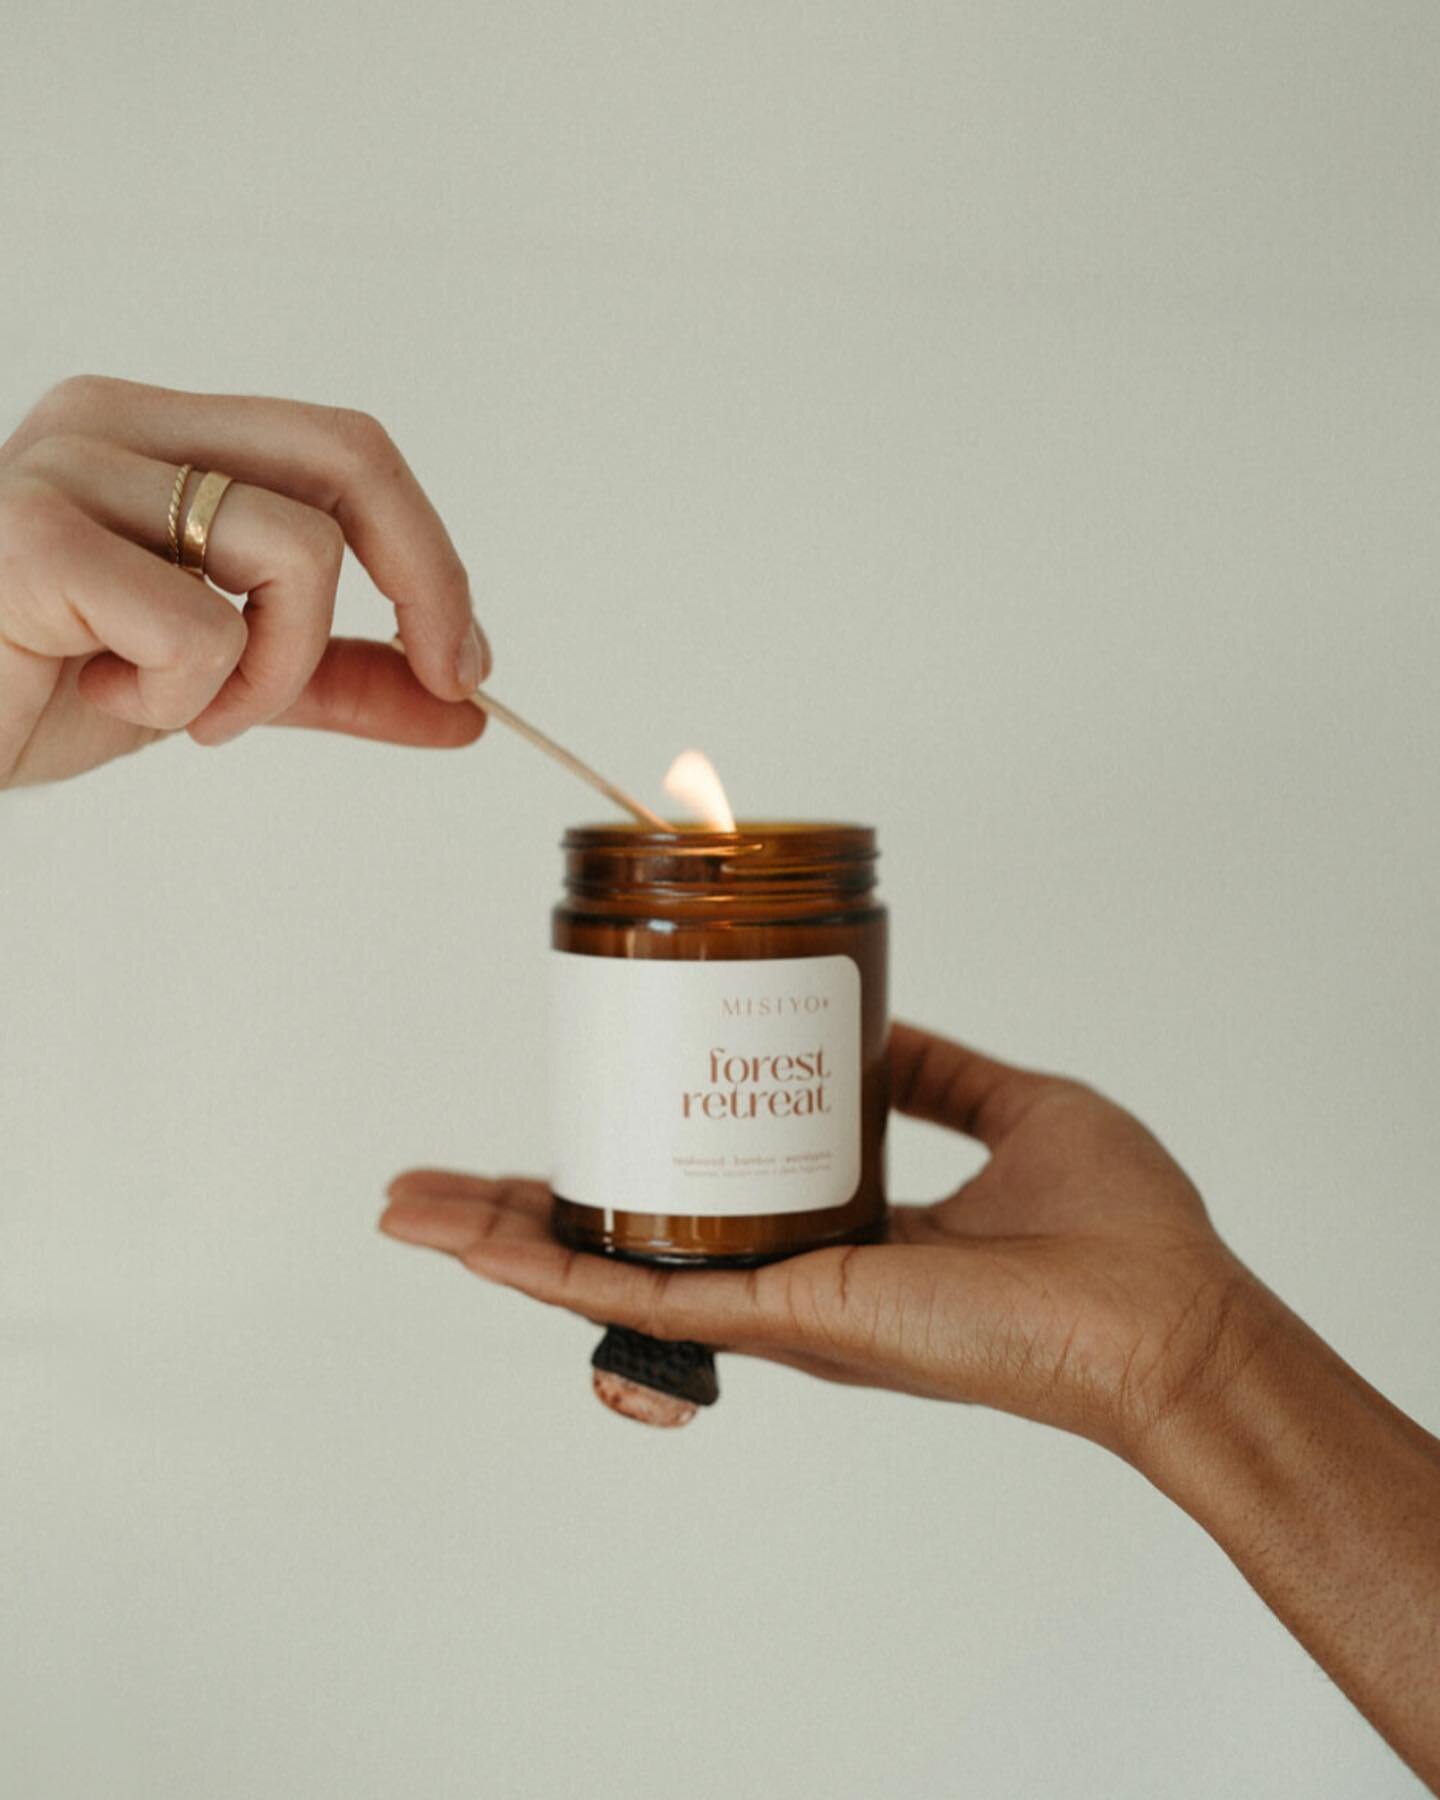 New Brand Alert 🔔 So happy to be carrying this beautiful new candle line. @misiyocandleco not only smell amazing, they also are committed to doing good in this world. With every candle purchase you are giving 3 months of health insurance to someone 